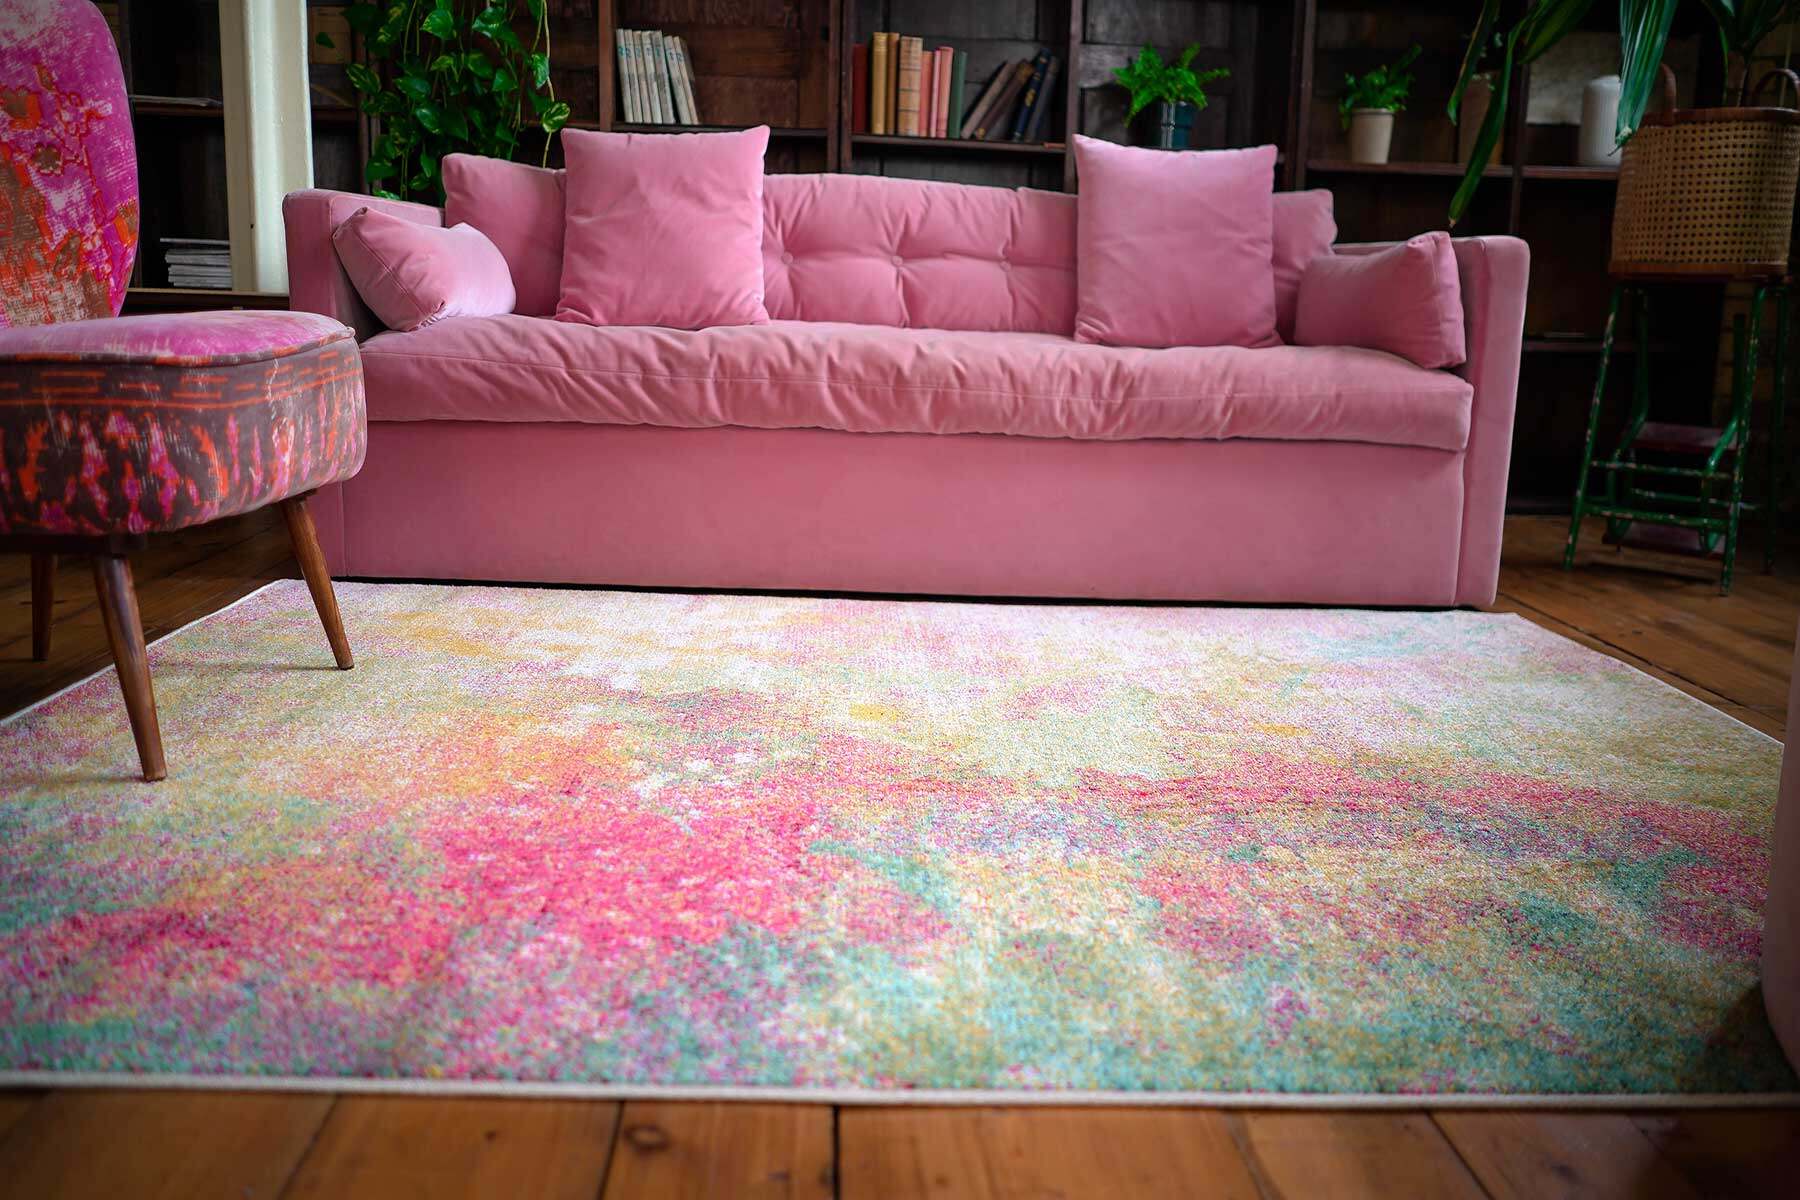 washable rugs styles: Design and Aesthetics